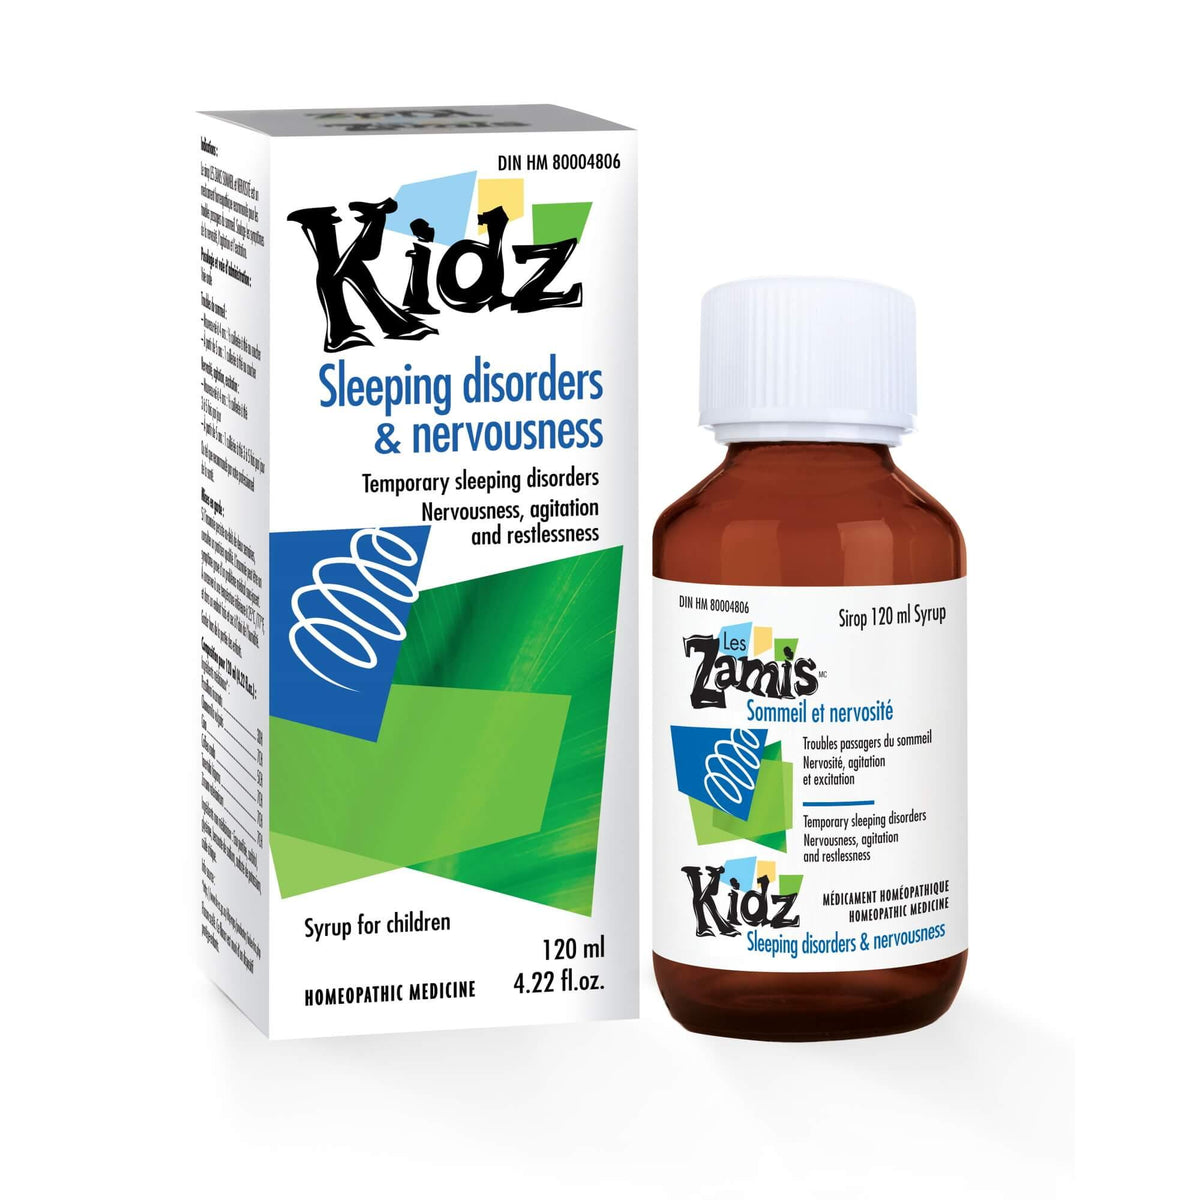 Kidz Sleeping Disorders & Nervousness 120mL Syrup Homeopathic at Village Vitamin Store